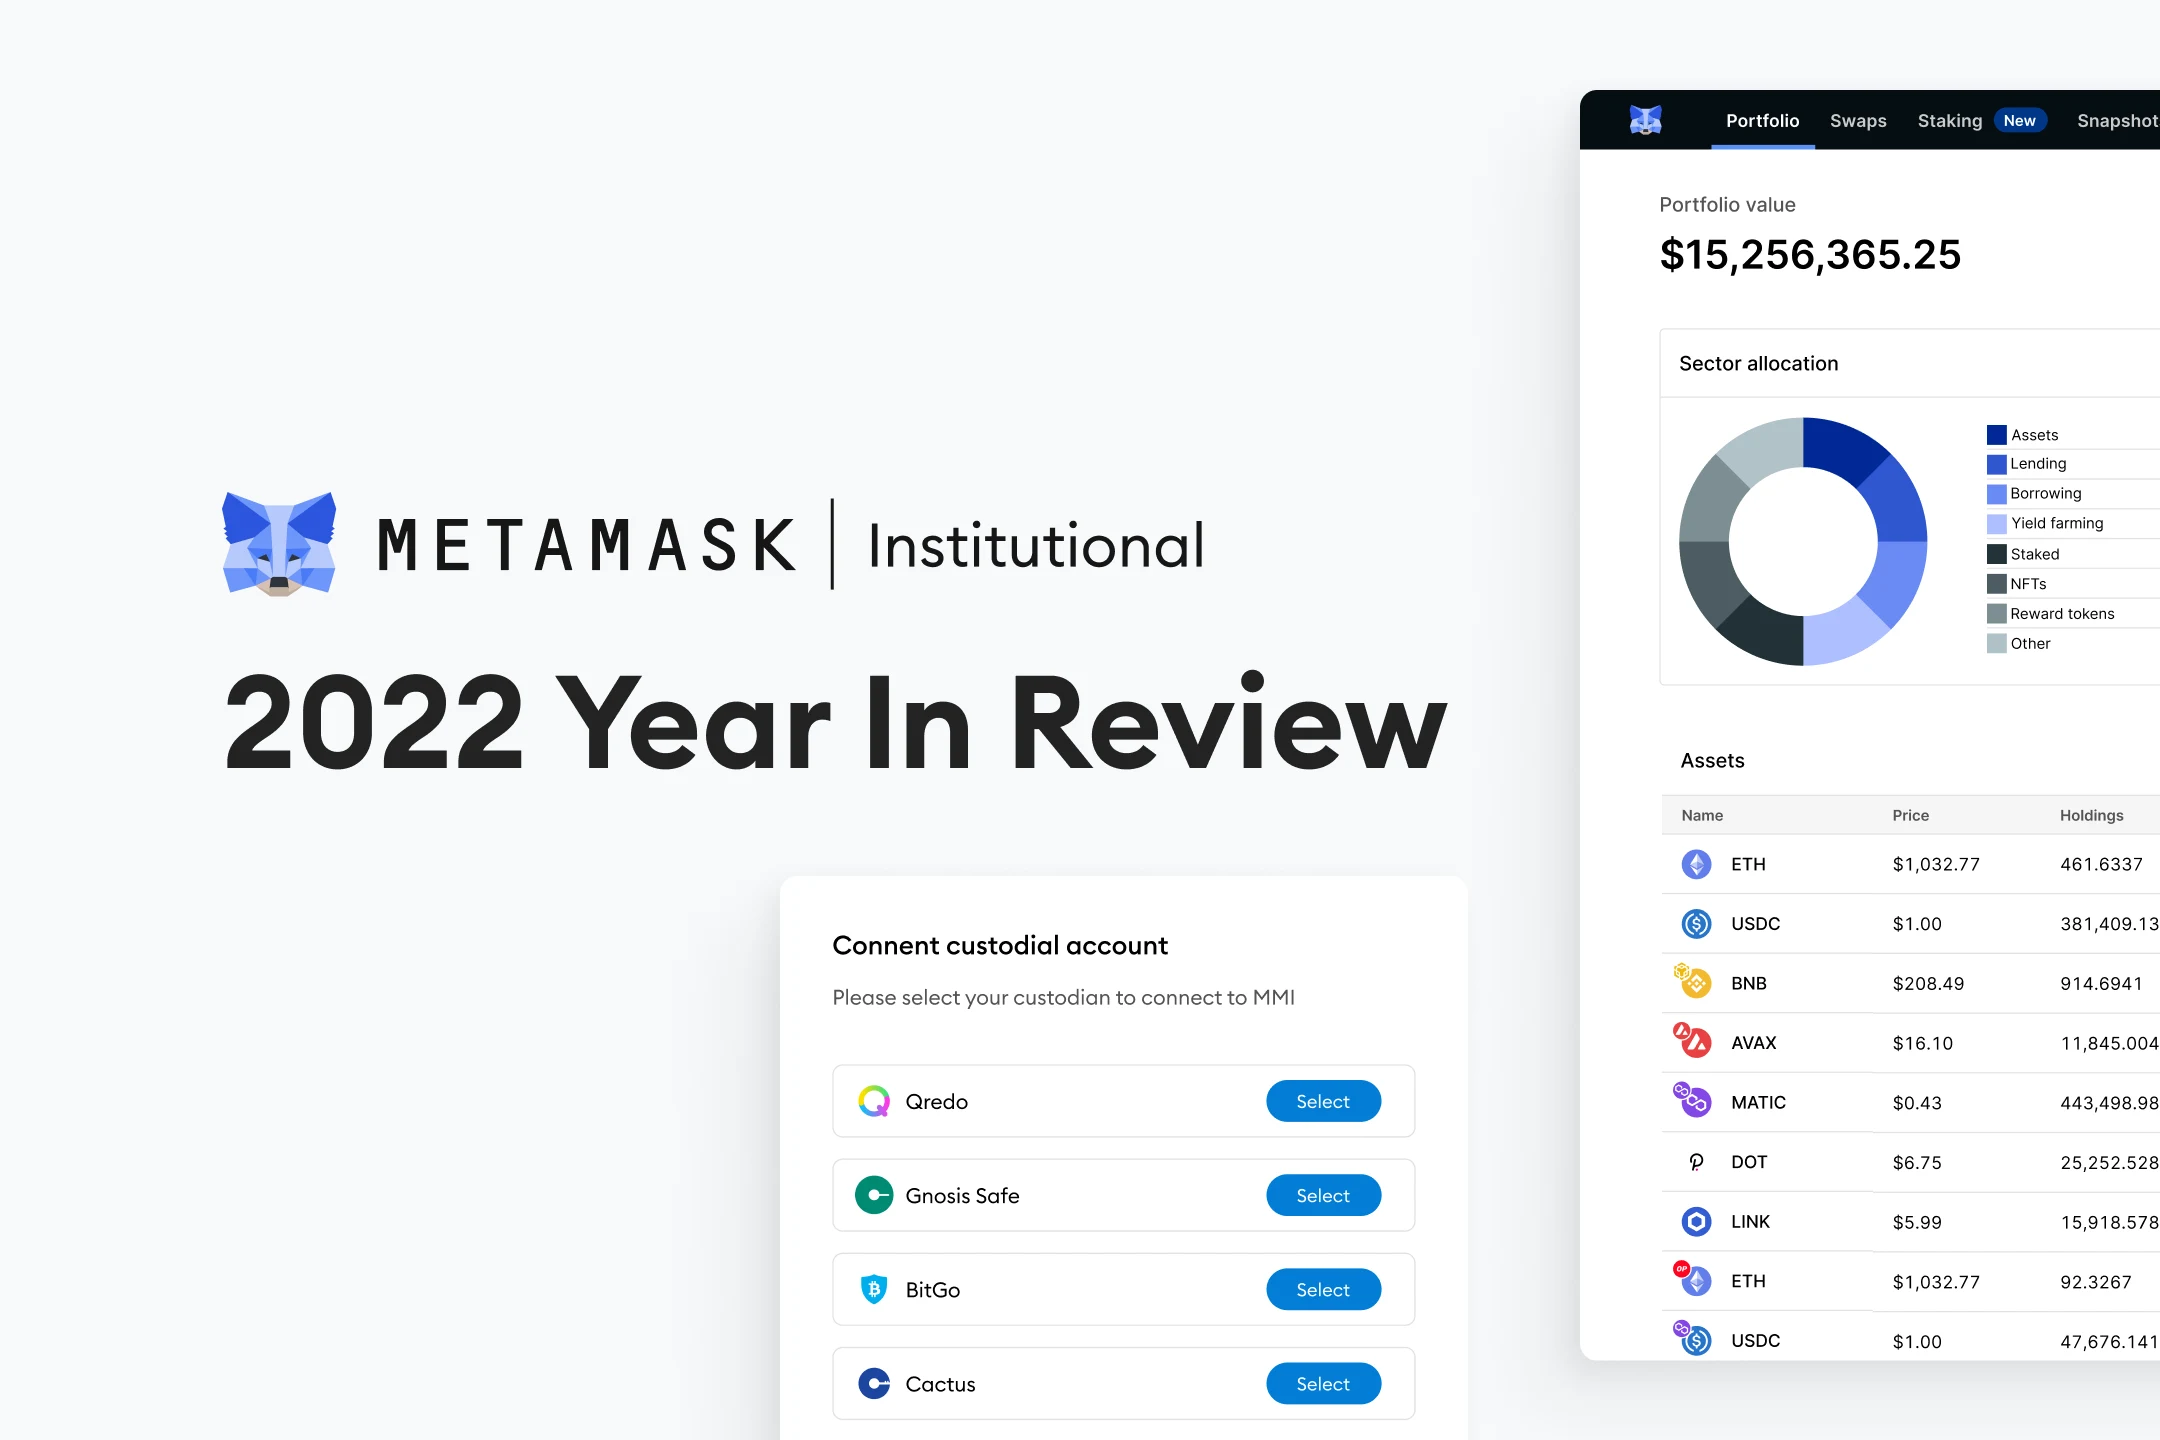 Image: MetaMask Institutional | 2022 Year in Review